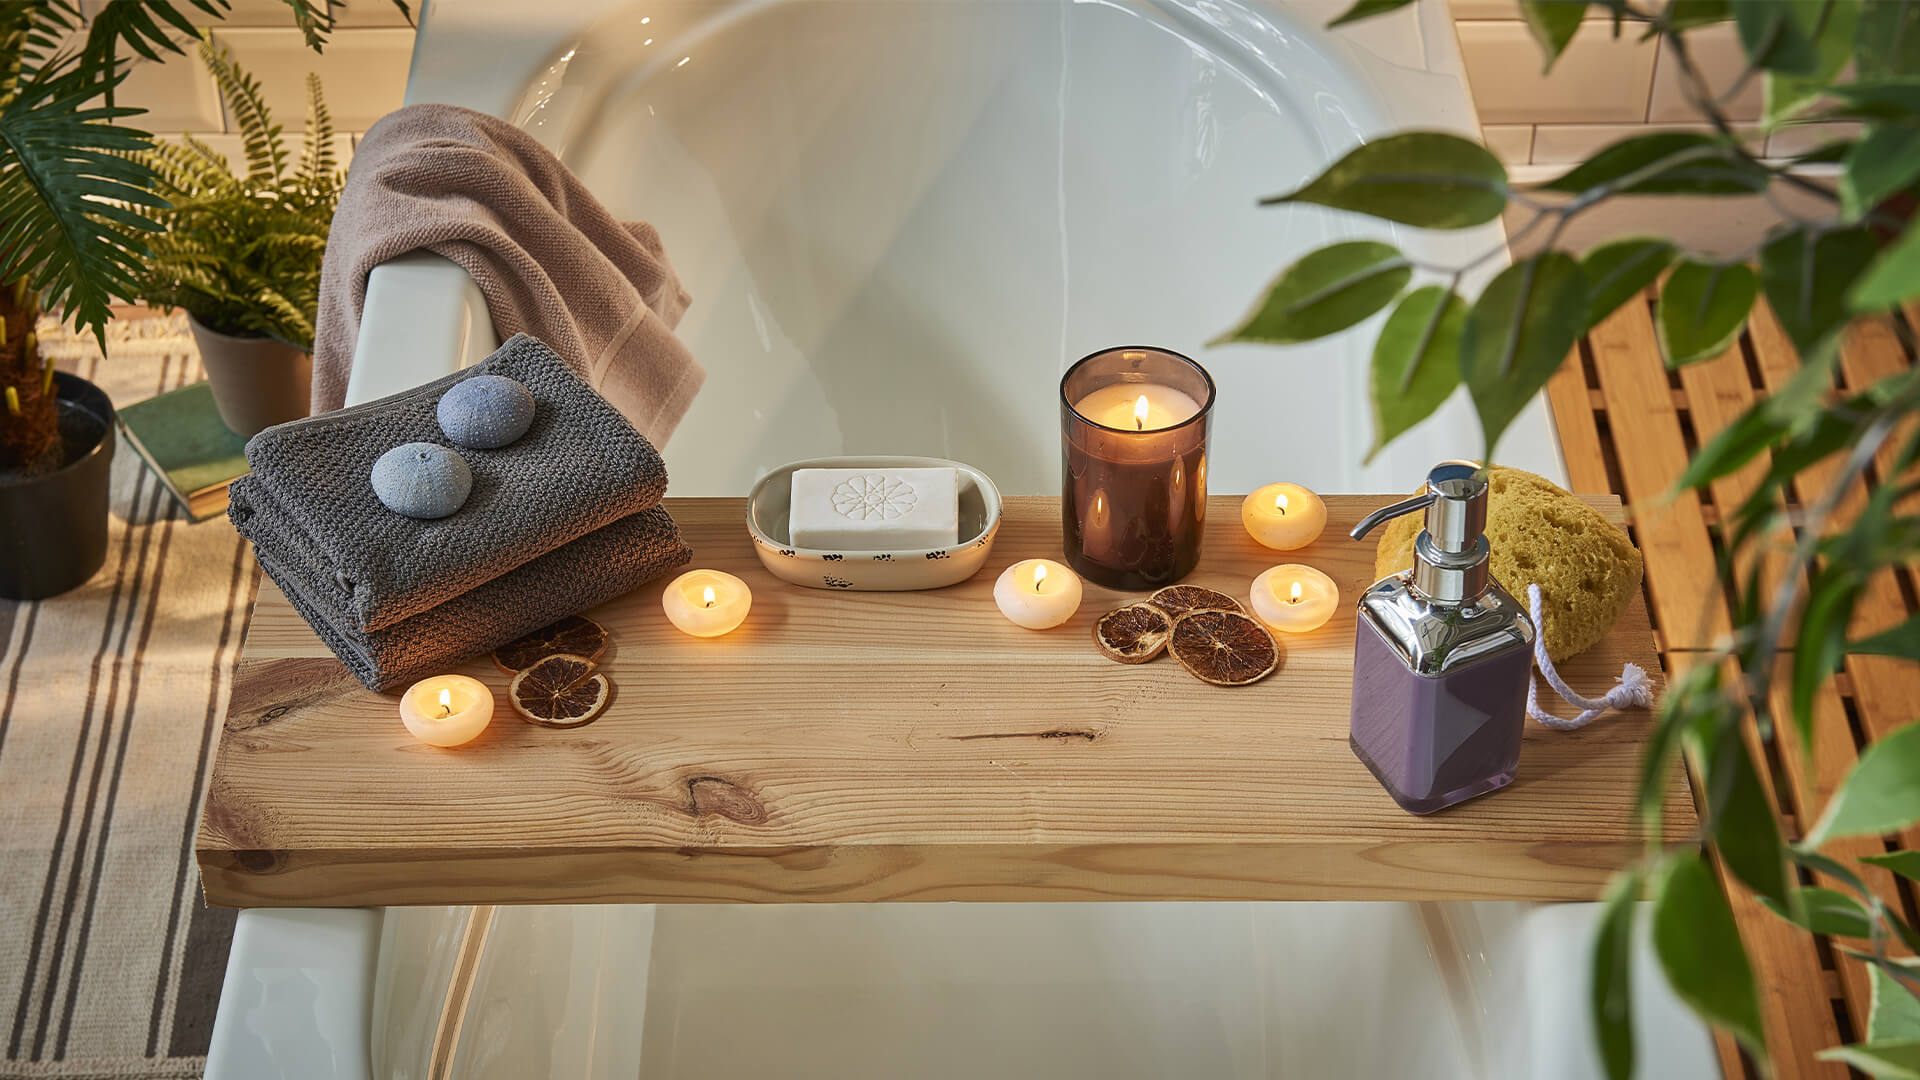 Bathtub with tray, candles, towels, plants, and bar soap